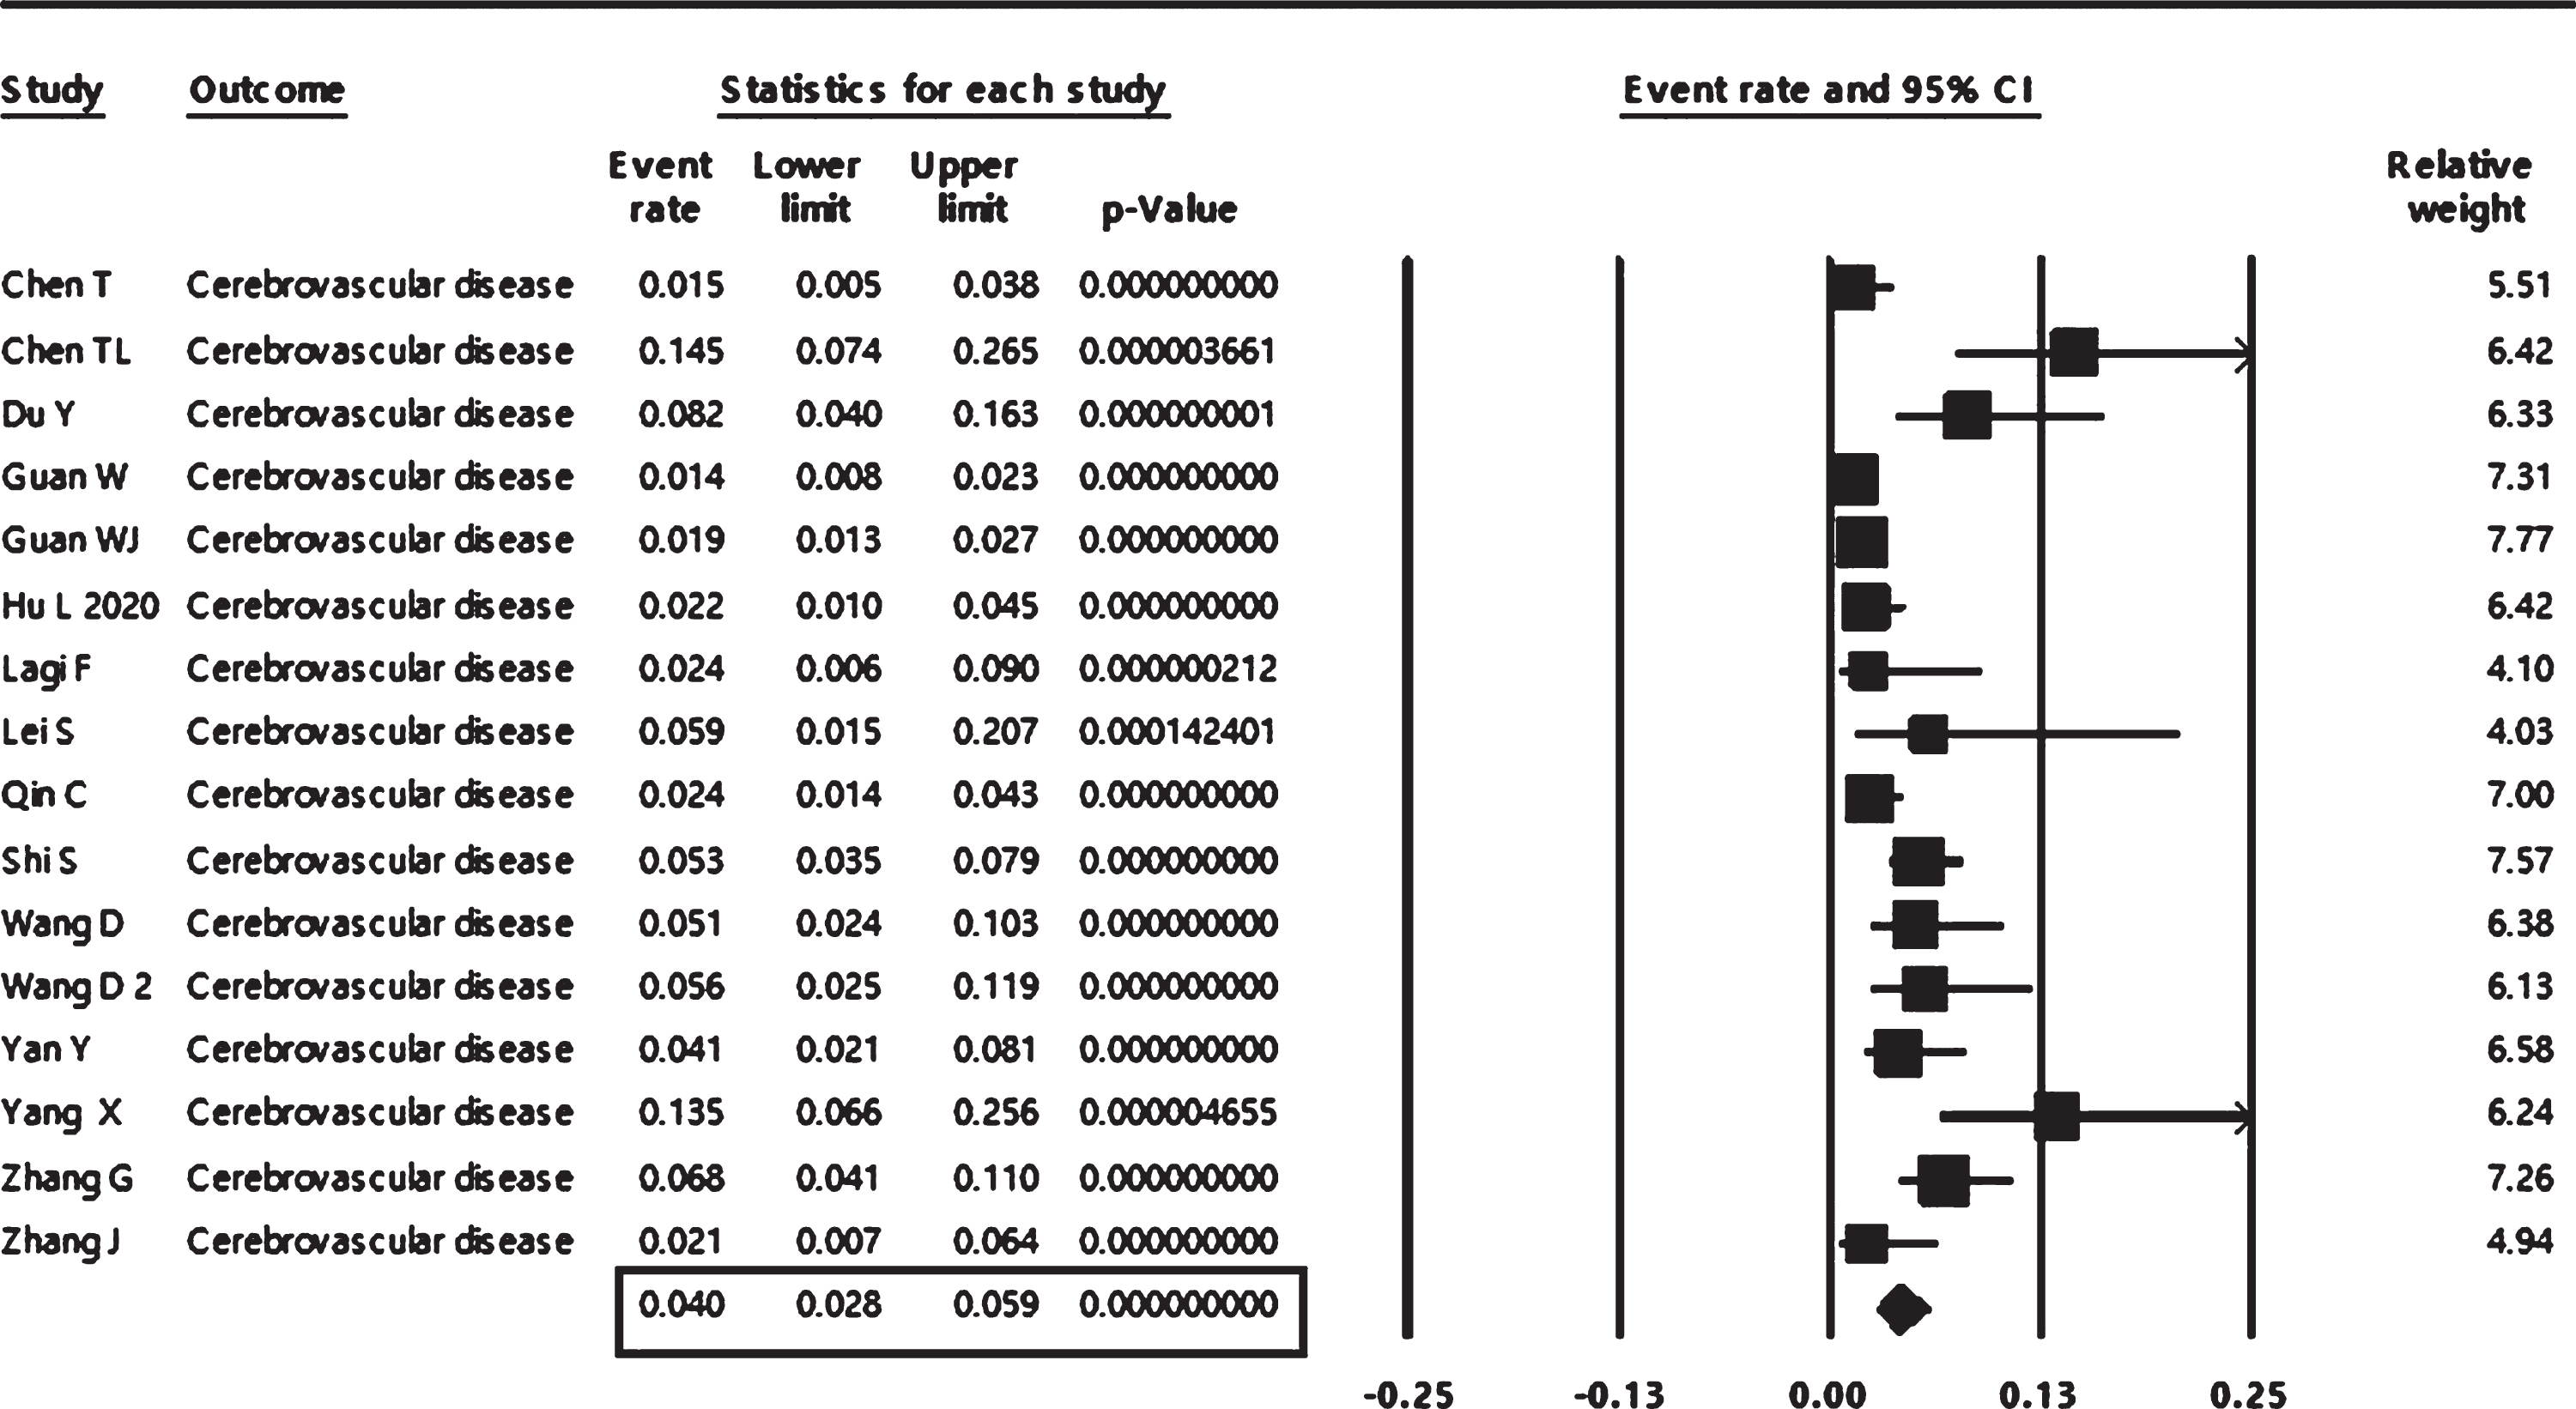 Pooled analysis of the event rate of cerebrovascular comorbidity in COVID-19 patients.